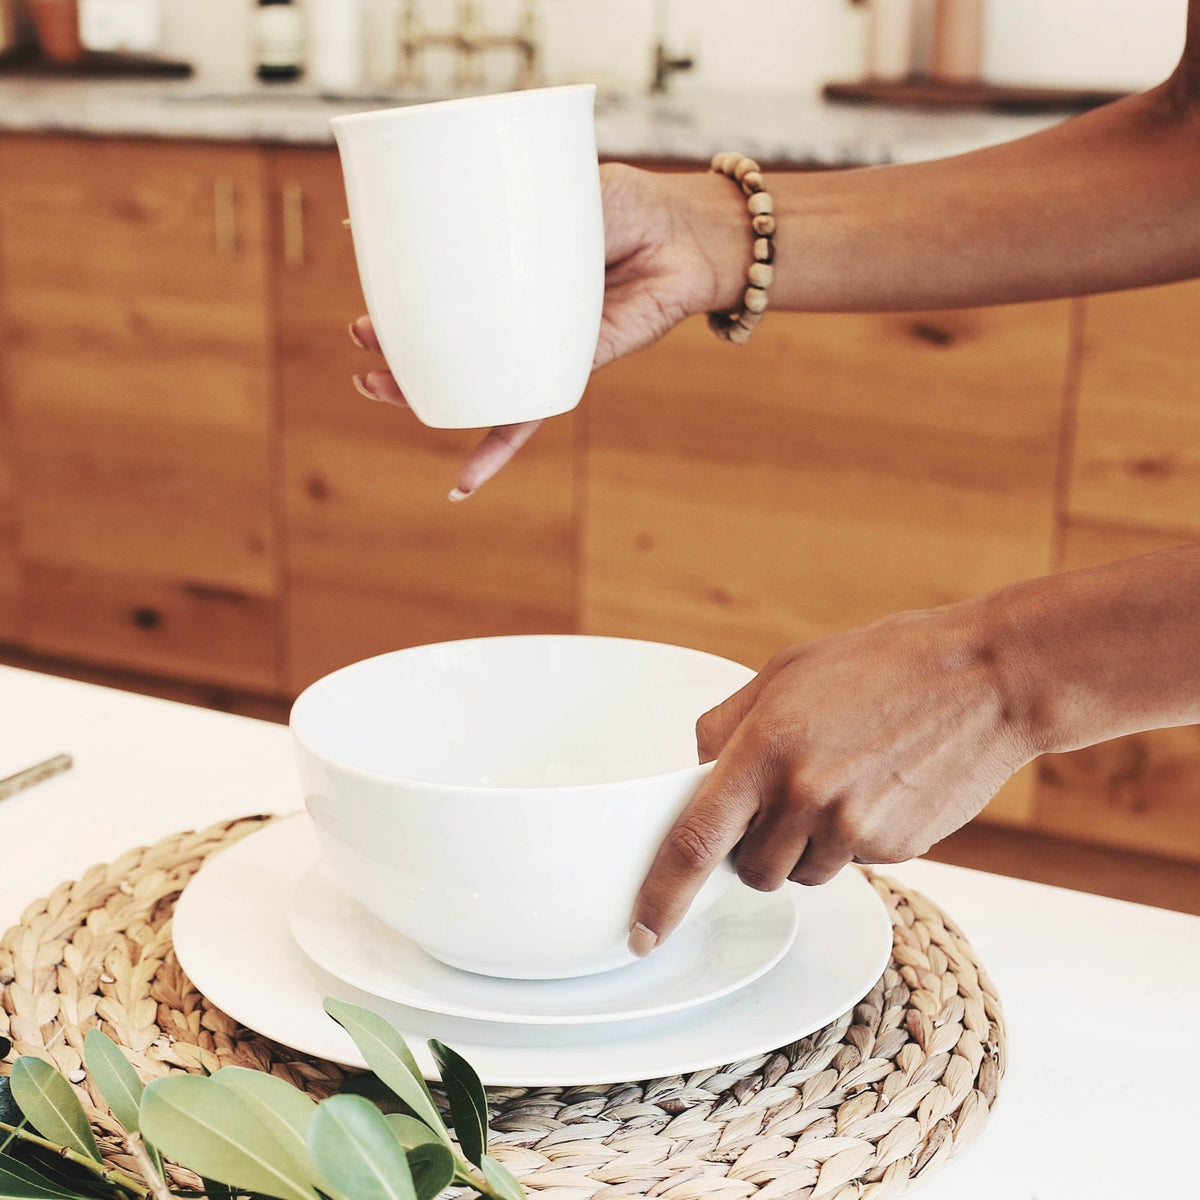 Lifestyle, woman places a white porcelain coffee mug onto a beautifully decorated dining room table complete with stacked white porcelain bowl and plates.